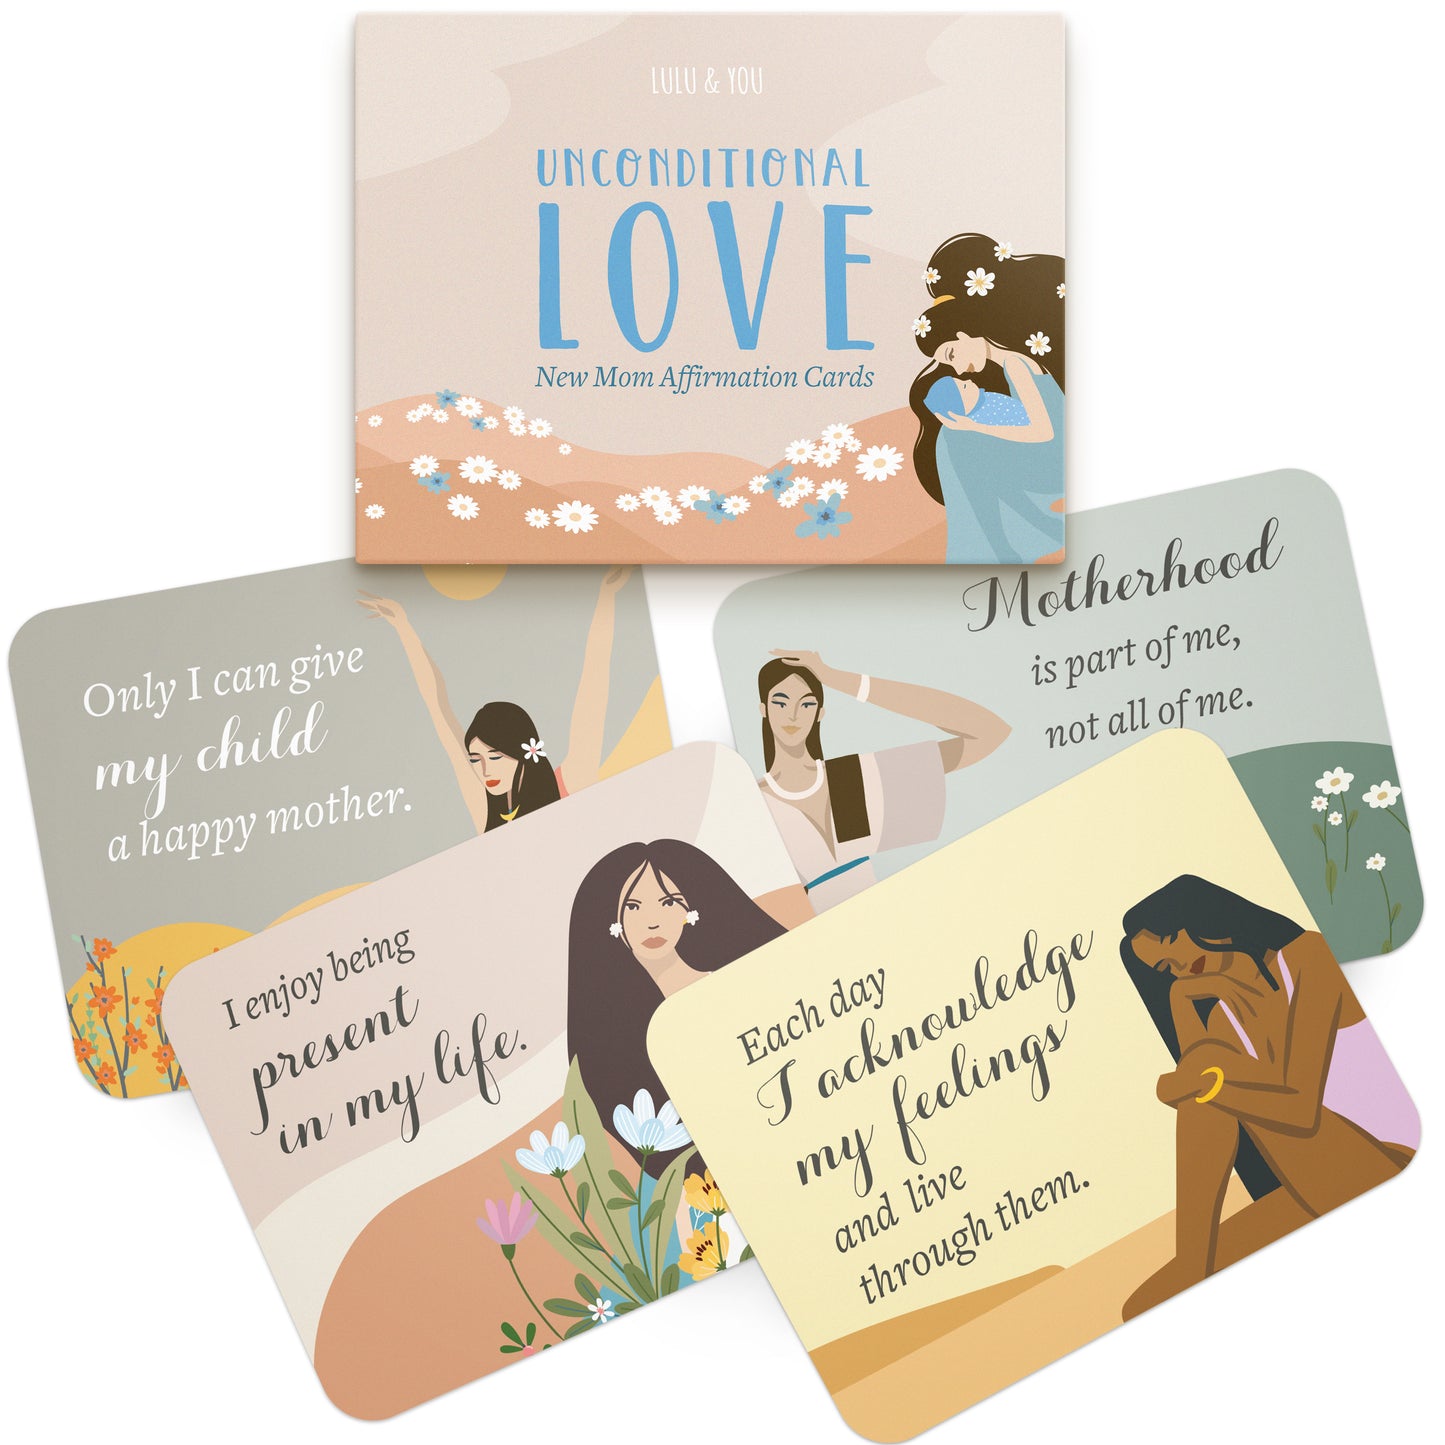 NEW MOM AFFIRMATION CARDS - Words of Encouragement and Support